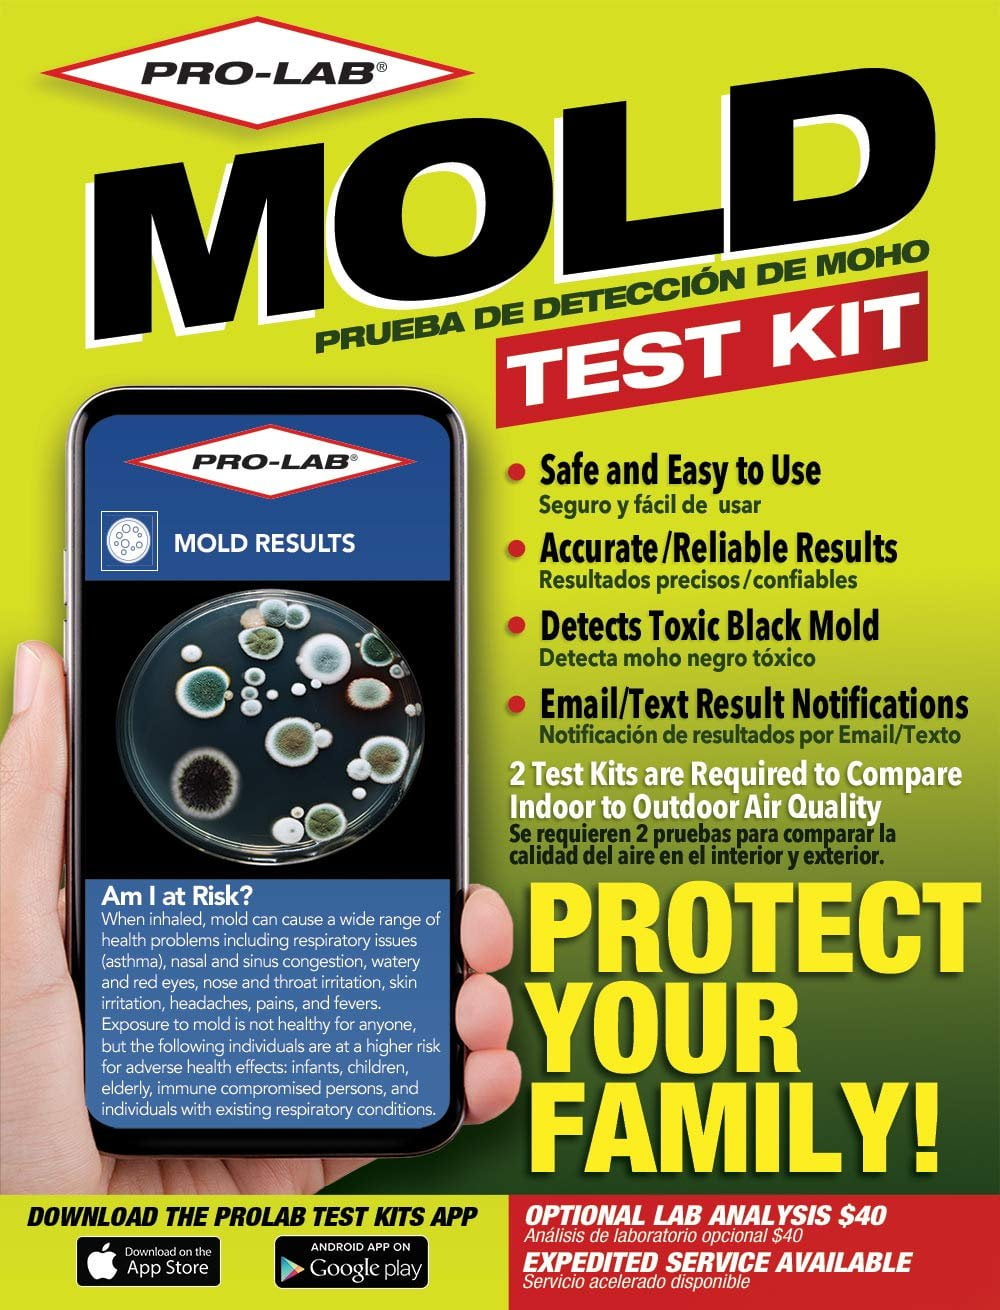 Mold Armor Do It Yourself Mold Test Kit FG500 Safe & Easy To Use 